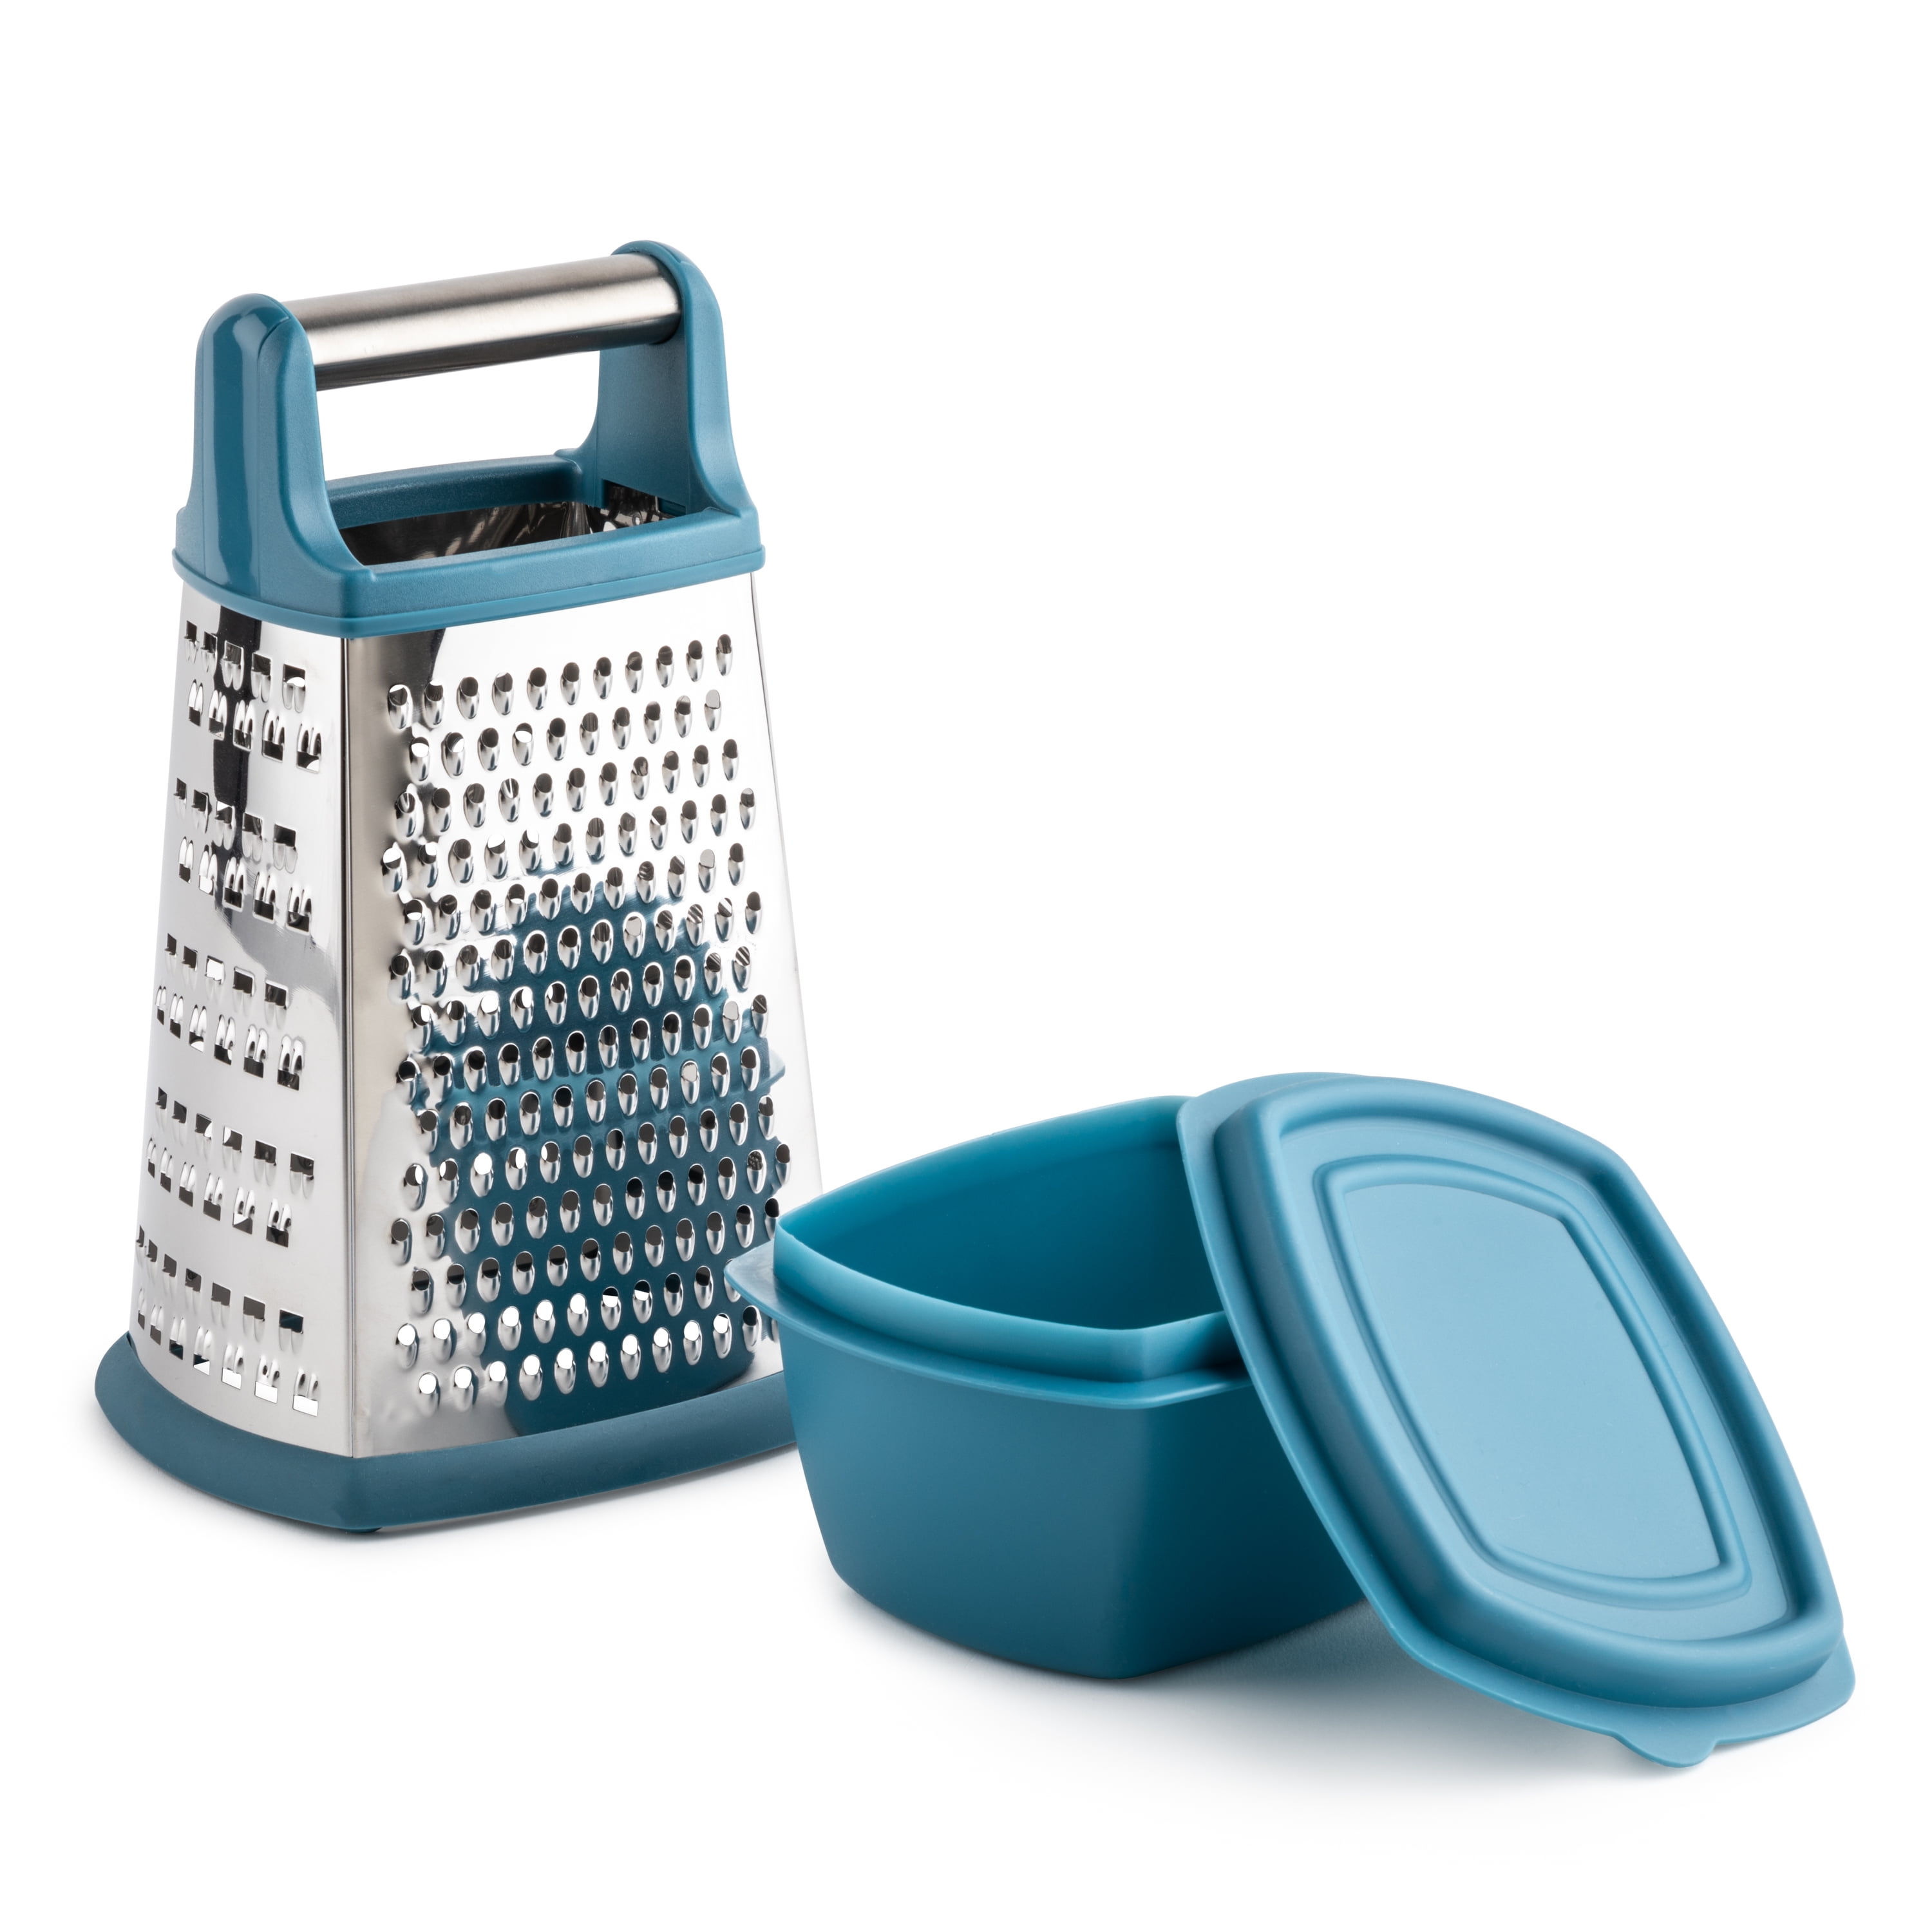 KitchenAid 4-Sided Cheese Grater